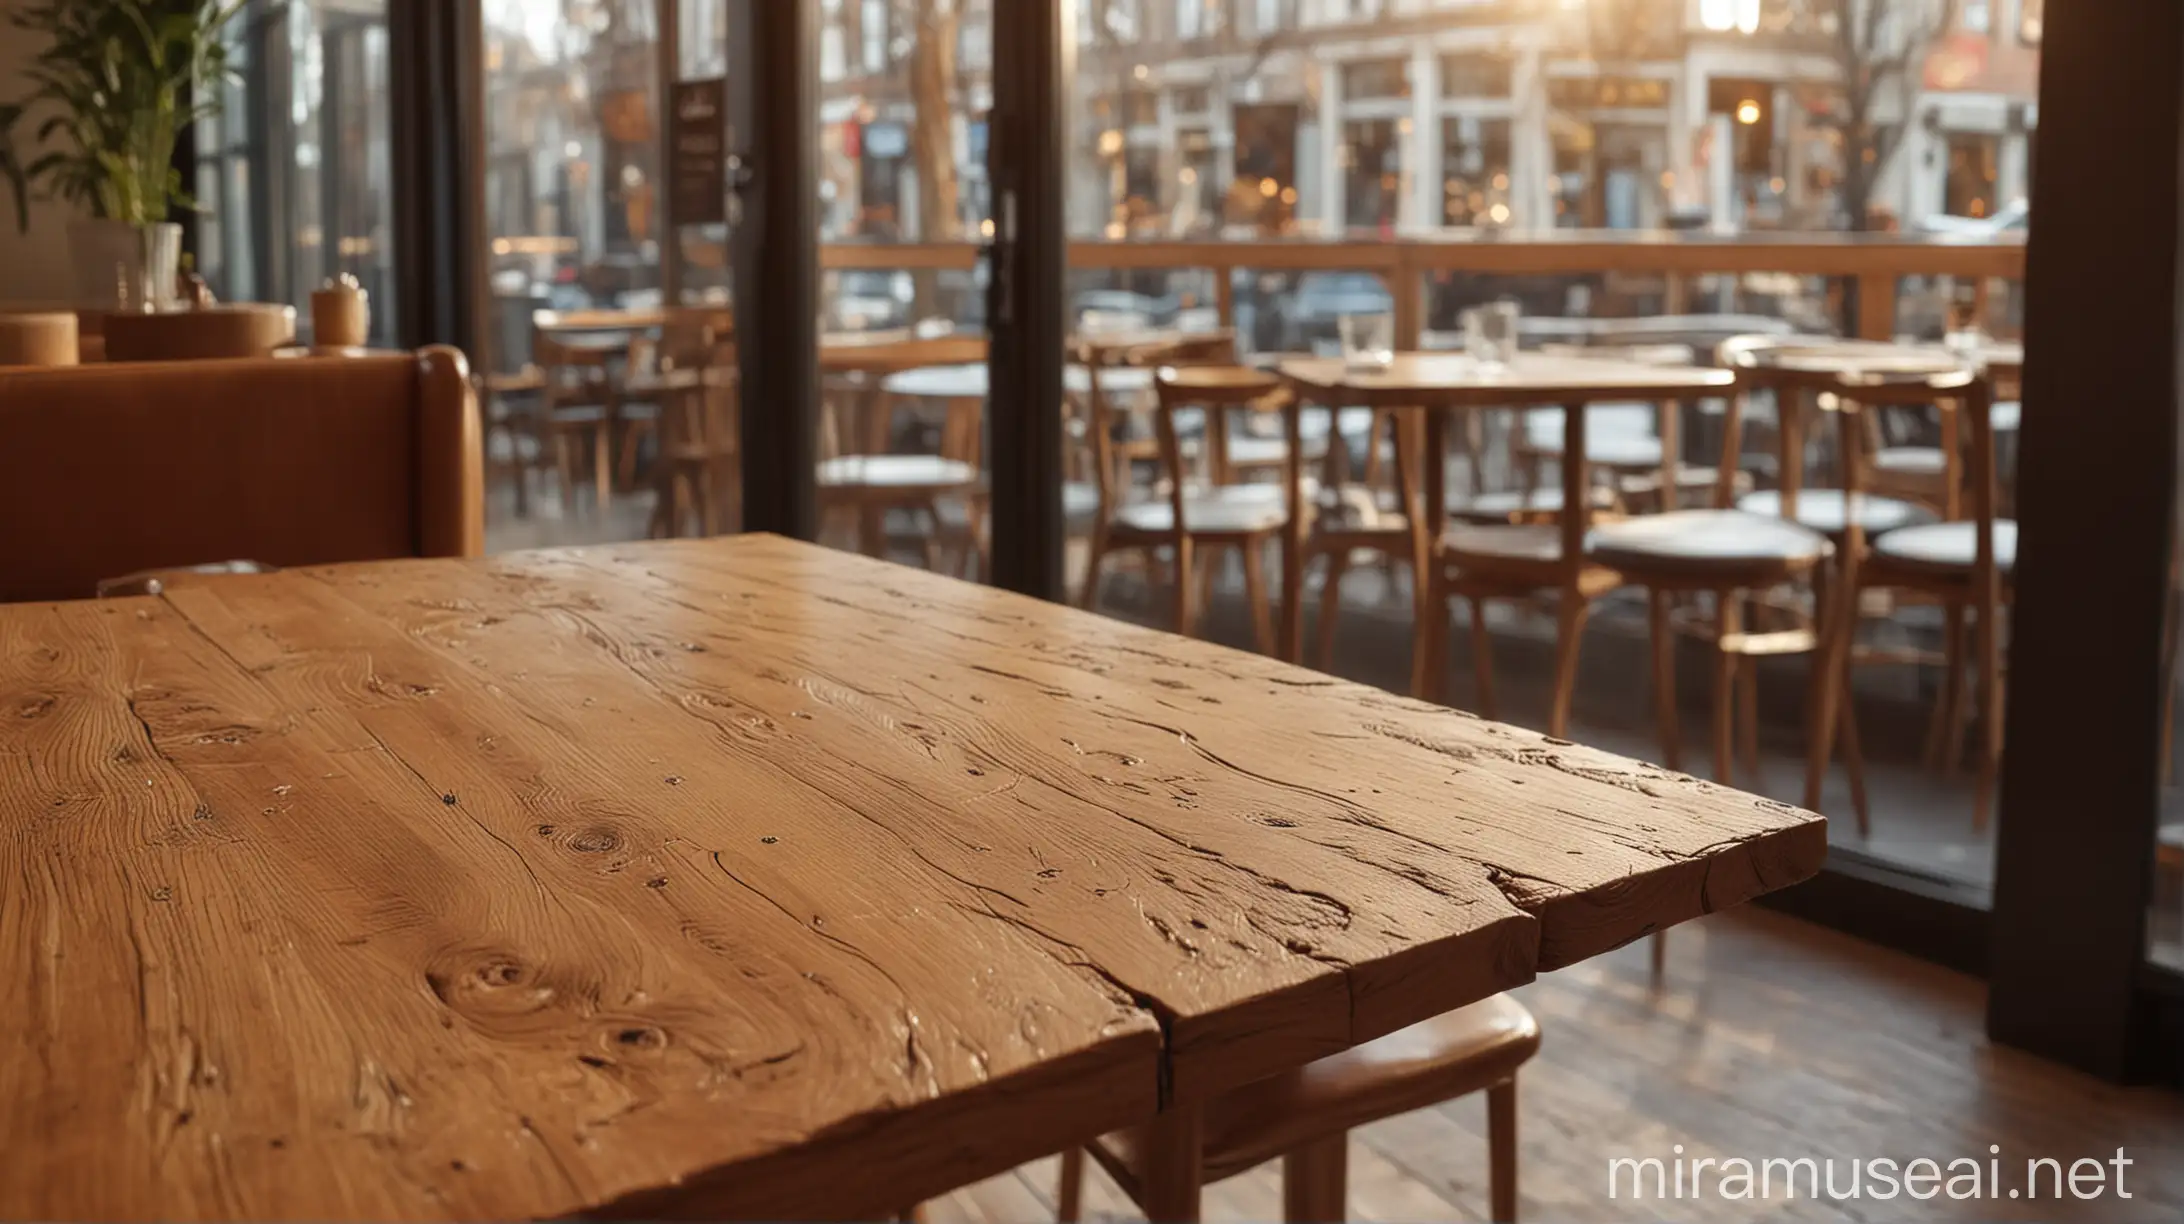 A close-up shot of a wooden table in a modern cafe interior, highlighting the textured wood grain and the warm, inviting light that streams through the window. The camera angle is low, creating a sense of intimacy and inviting the viewer to imagine themselves sitting at the table.